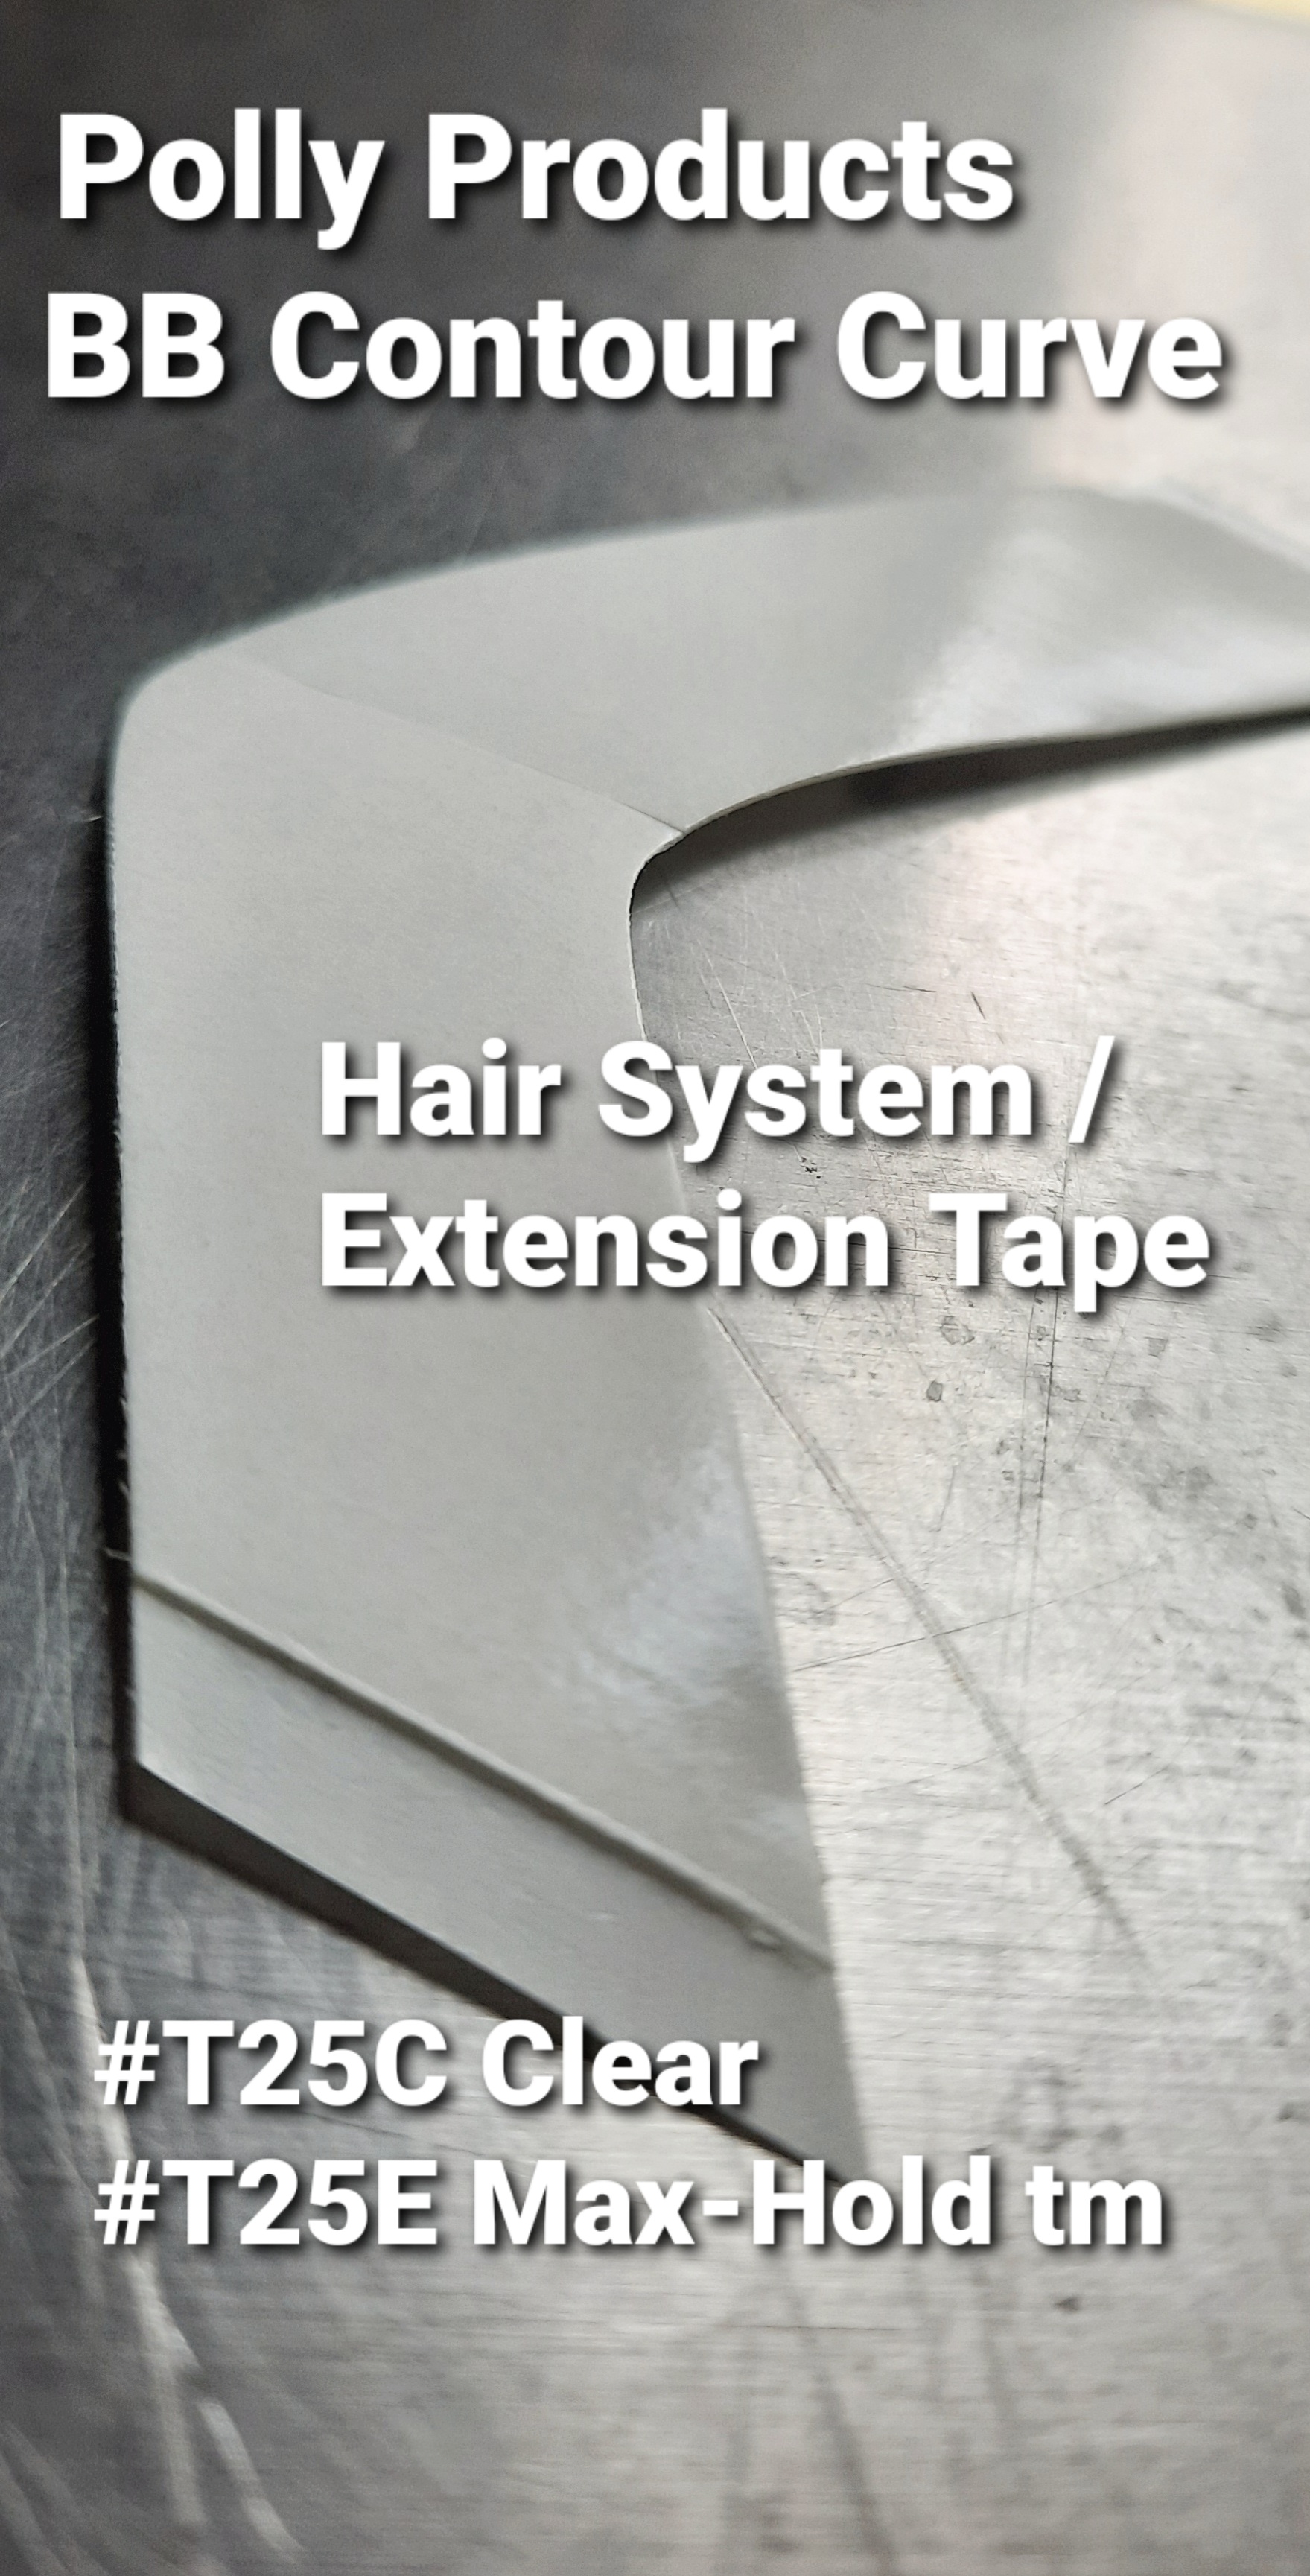 #T25E CONTOUR CURVE BB HAIR EXTENSION AND SYSTEM TAPE: MAX-HOLD tm 2-6 week. MADE IN THE USA 